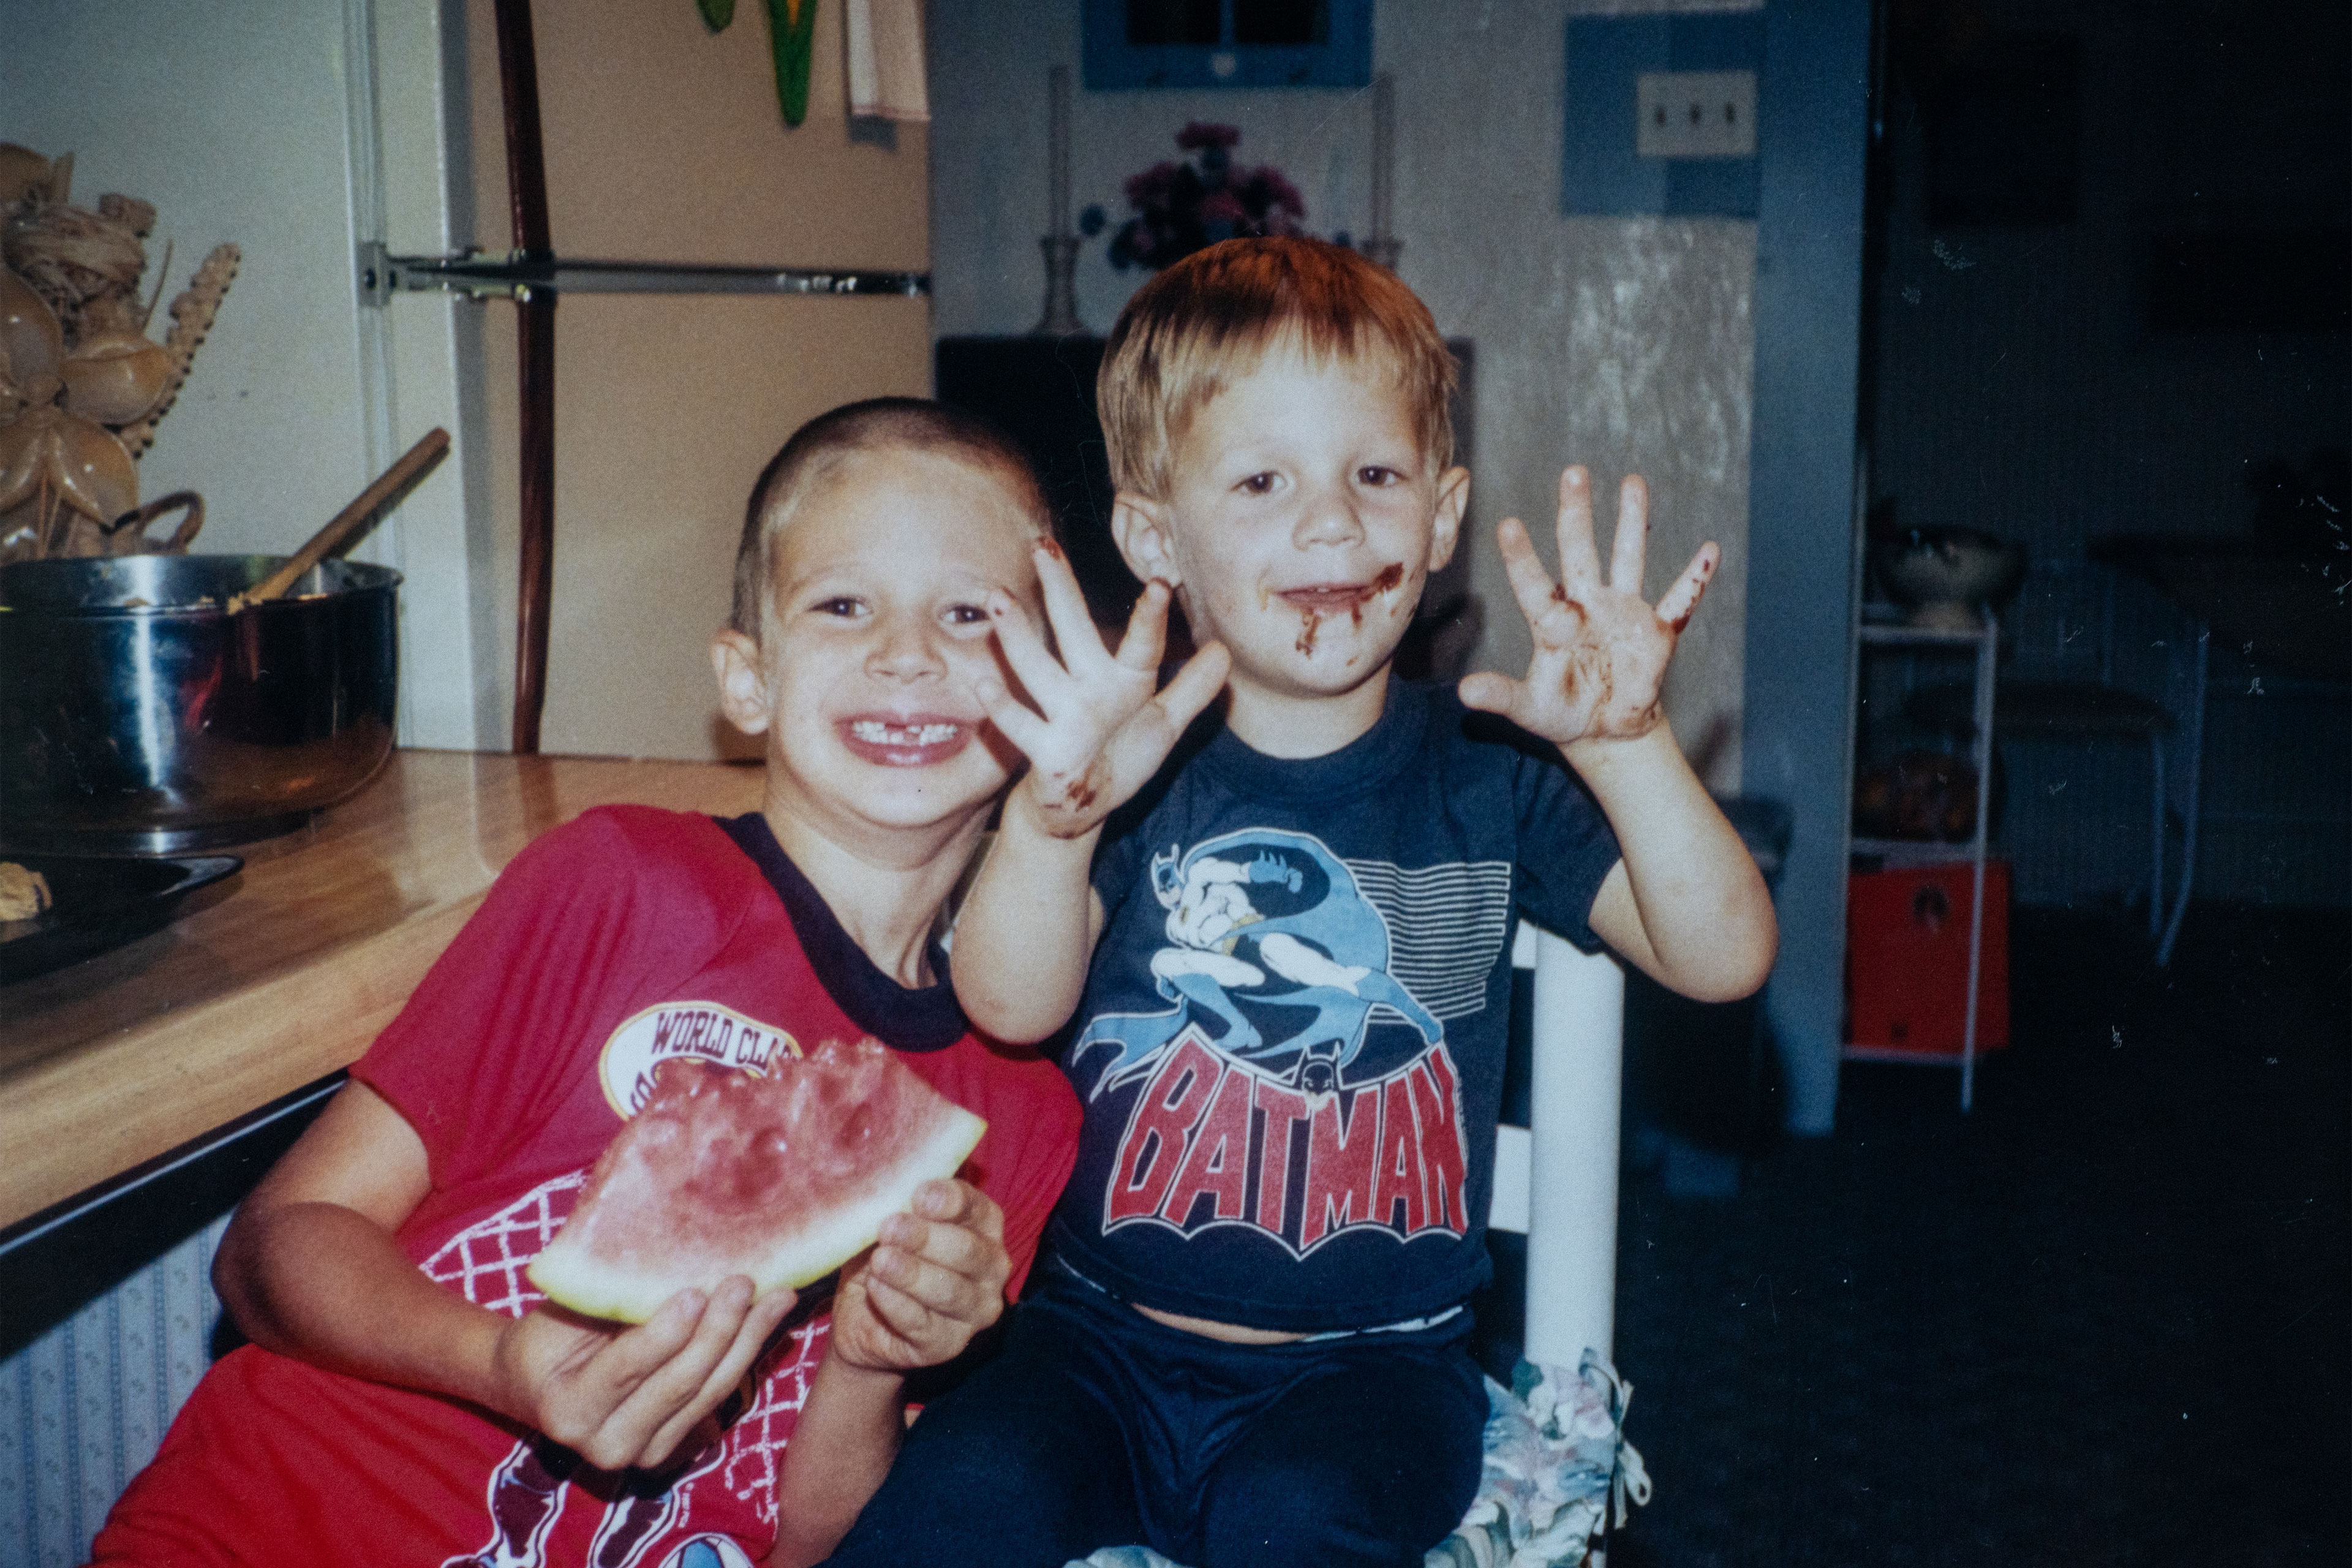 Two children, both boys, smile at the camera. One boy, in a red tshirt, is eating a slice of watermelon and has several front teeth missing. The other, in a navy Batman t-shirt, holds up his hands which, like his face, are covered in food.